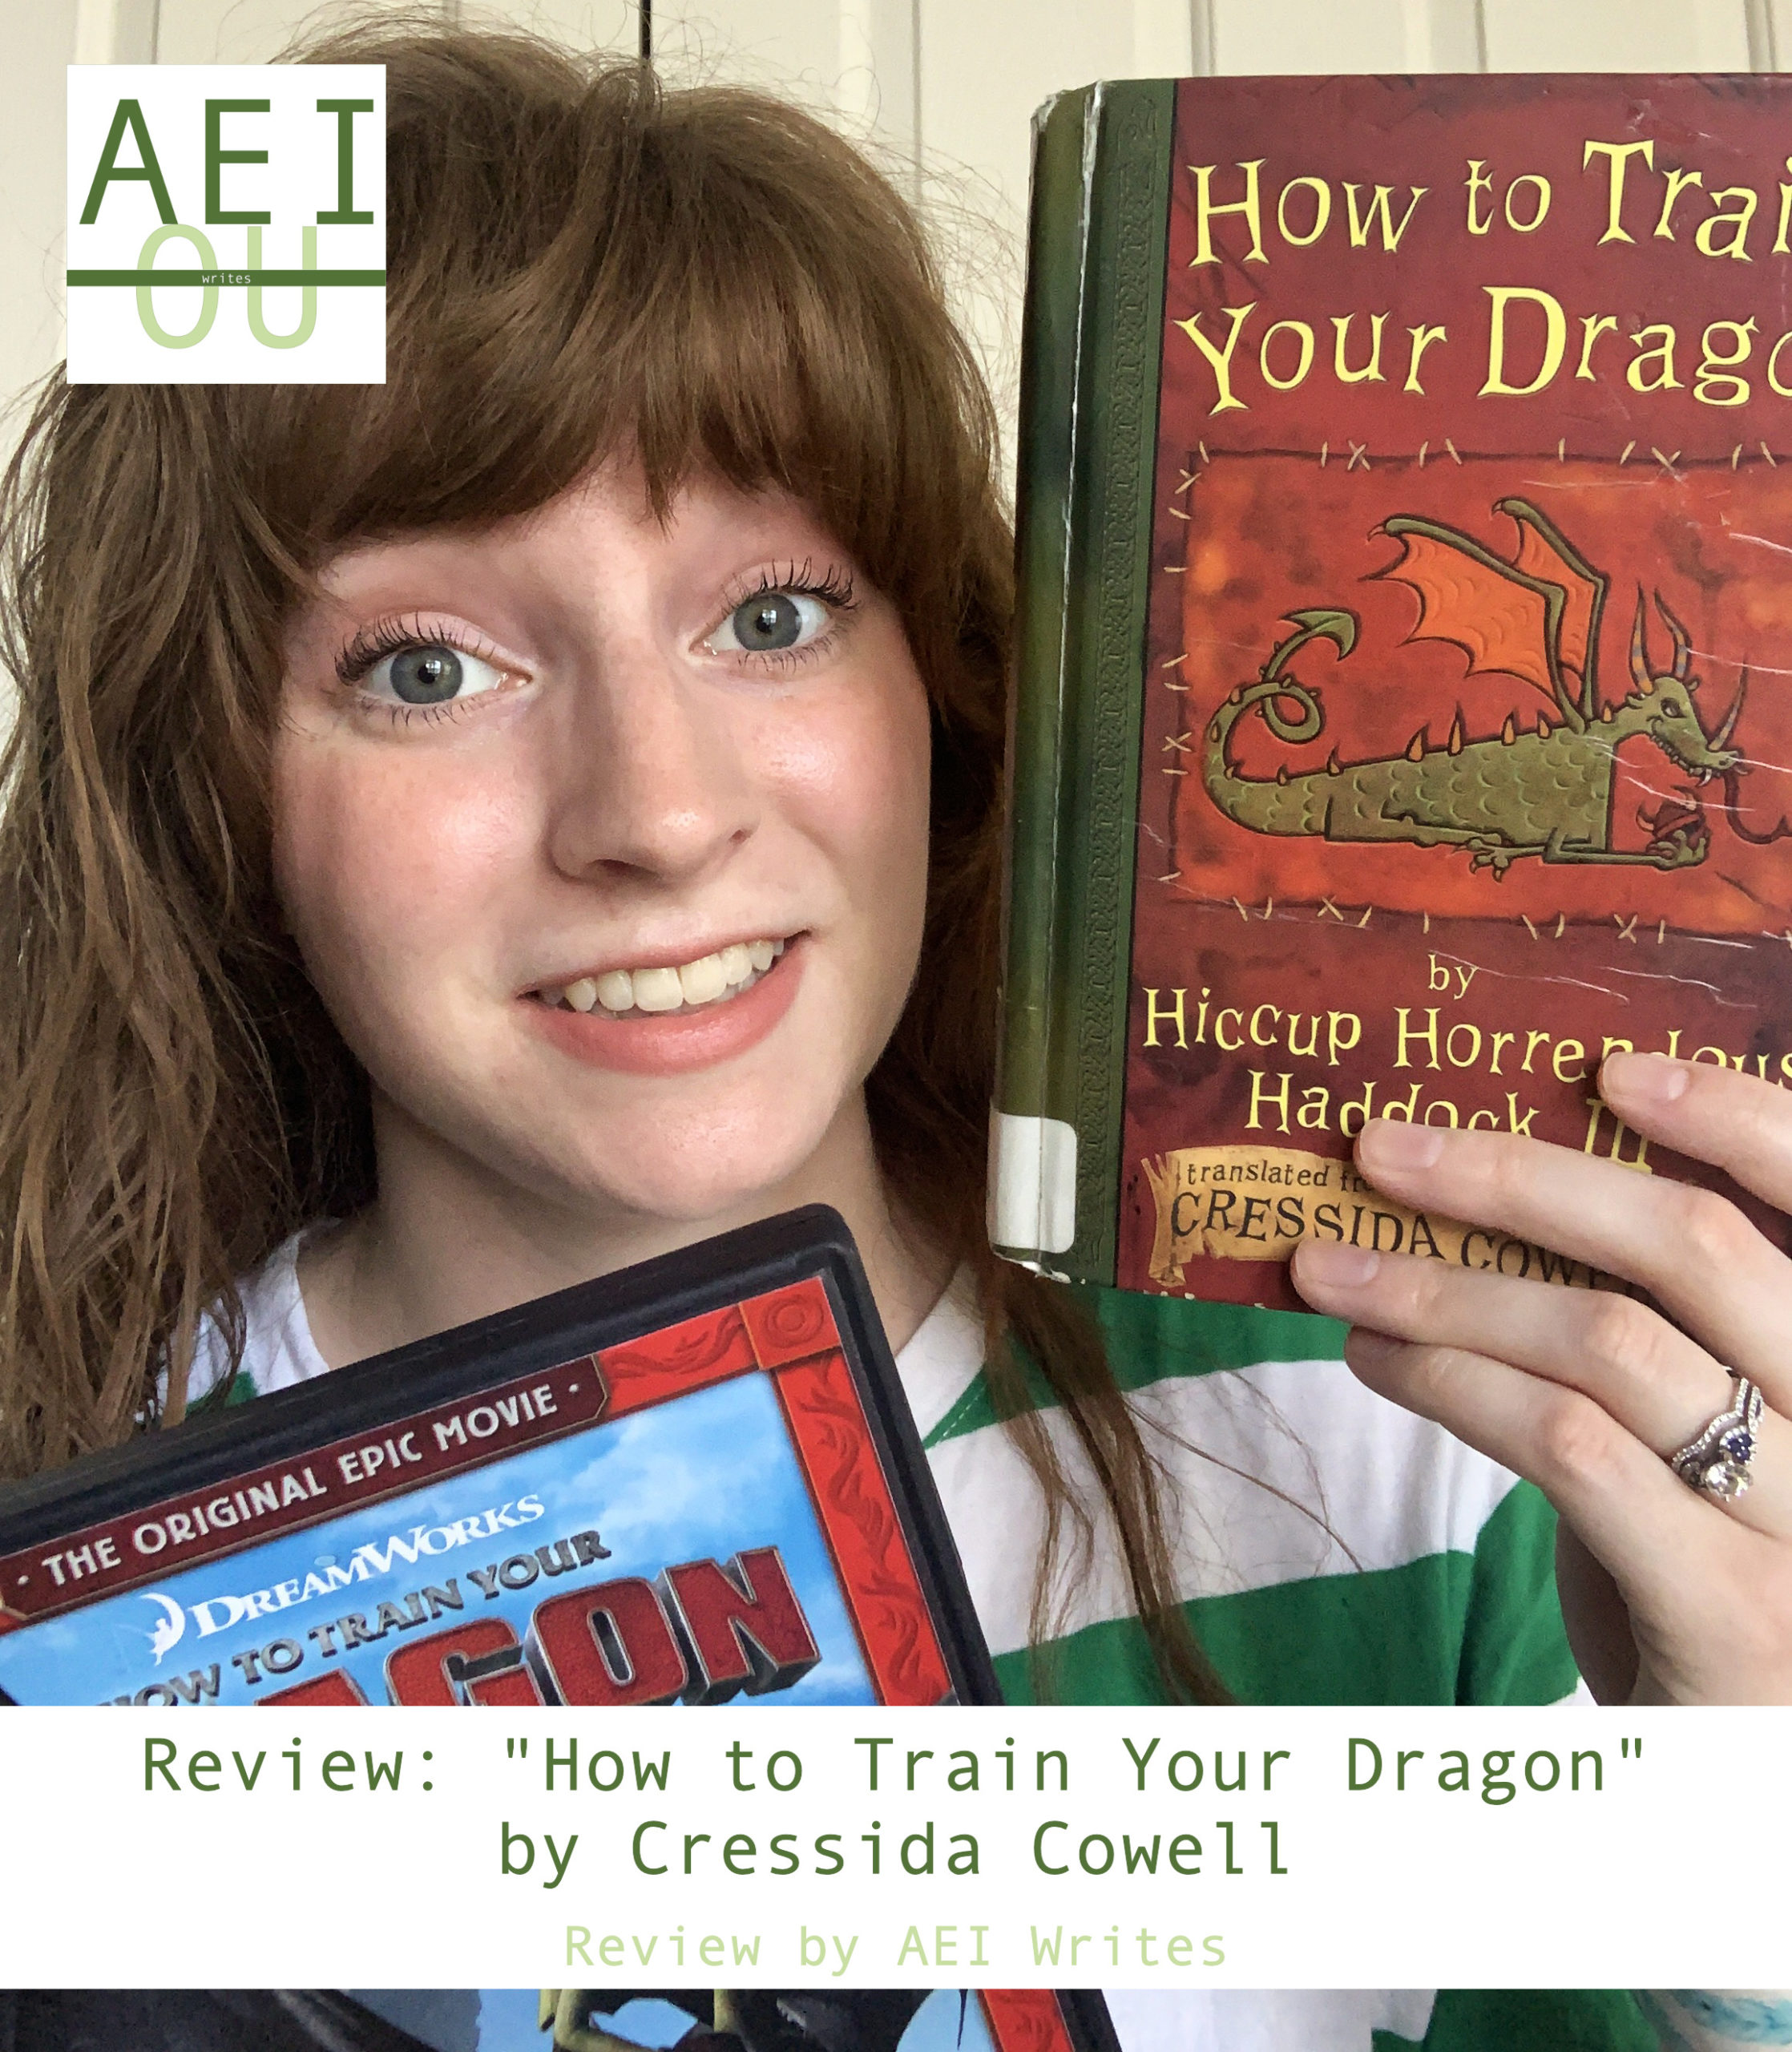 Review: “How to Train Your Dragon” by Cressida Cowell